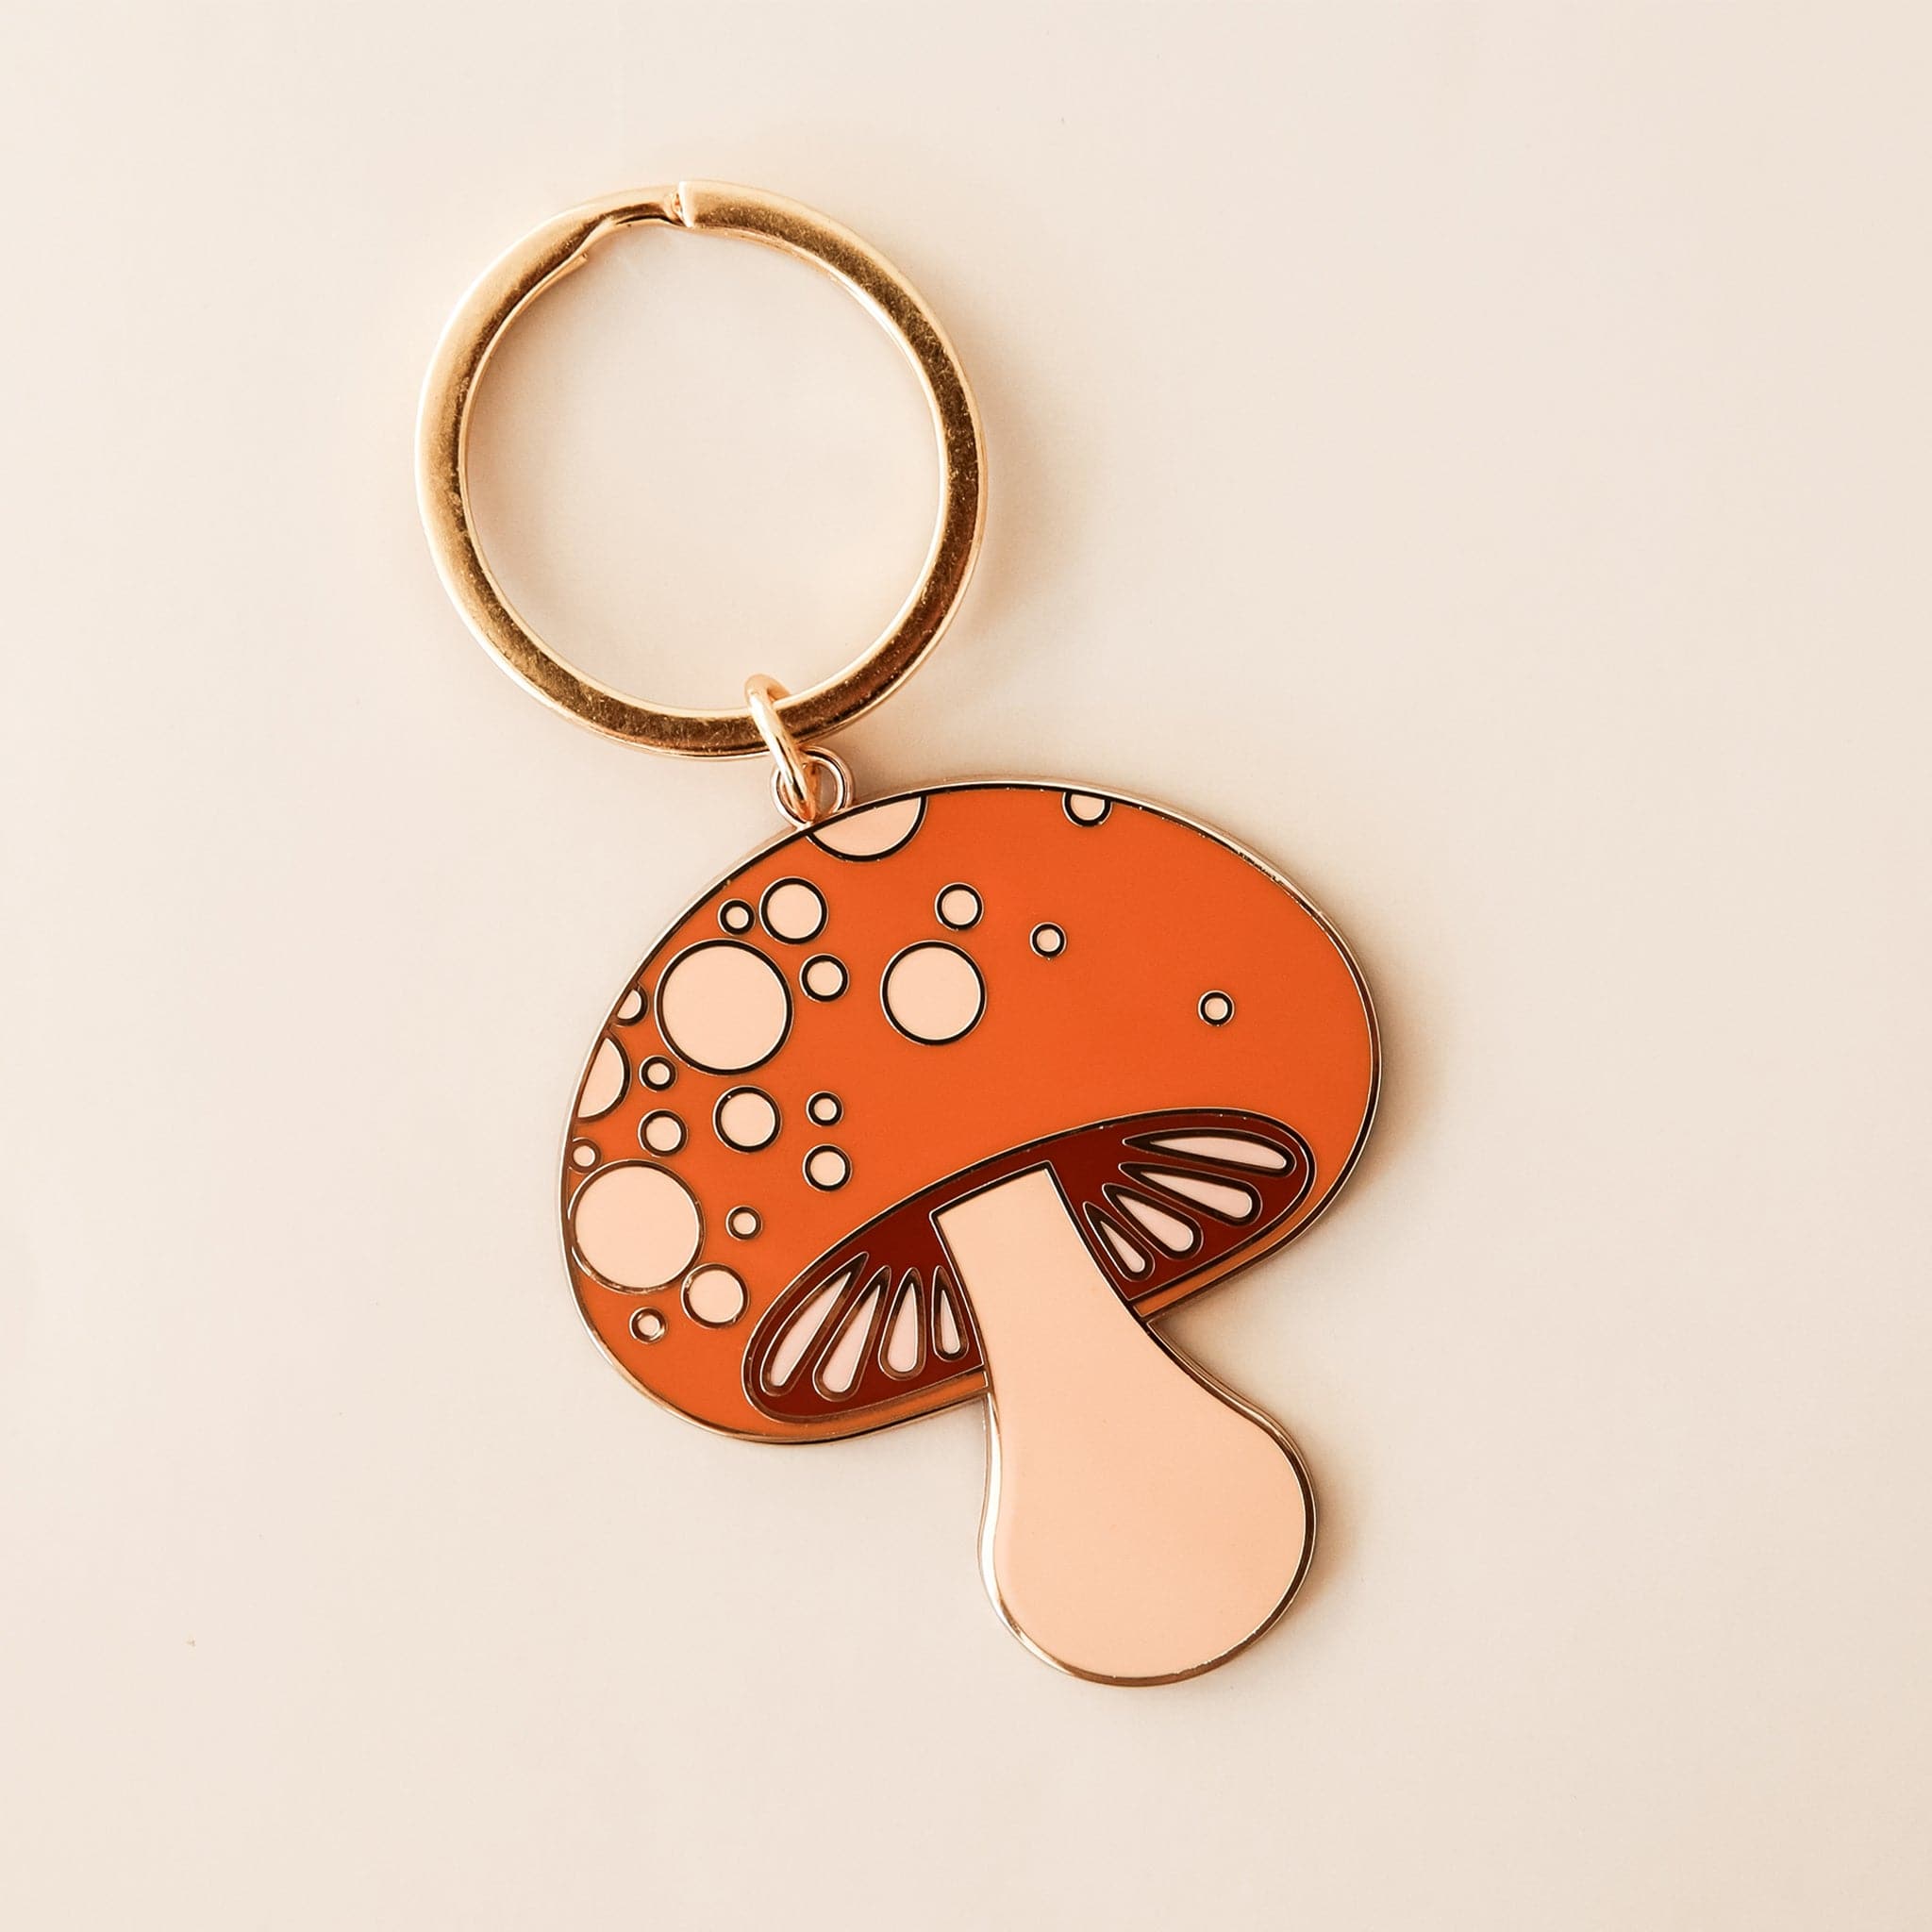 Mushroom keychain with red top with soft pink spots. The keychain is complete with gold detailing and a golden key ring. 